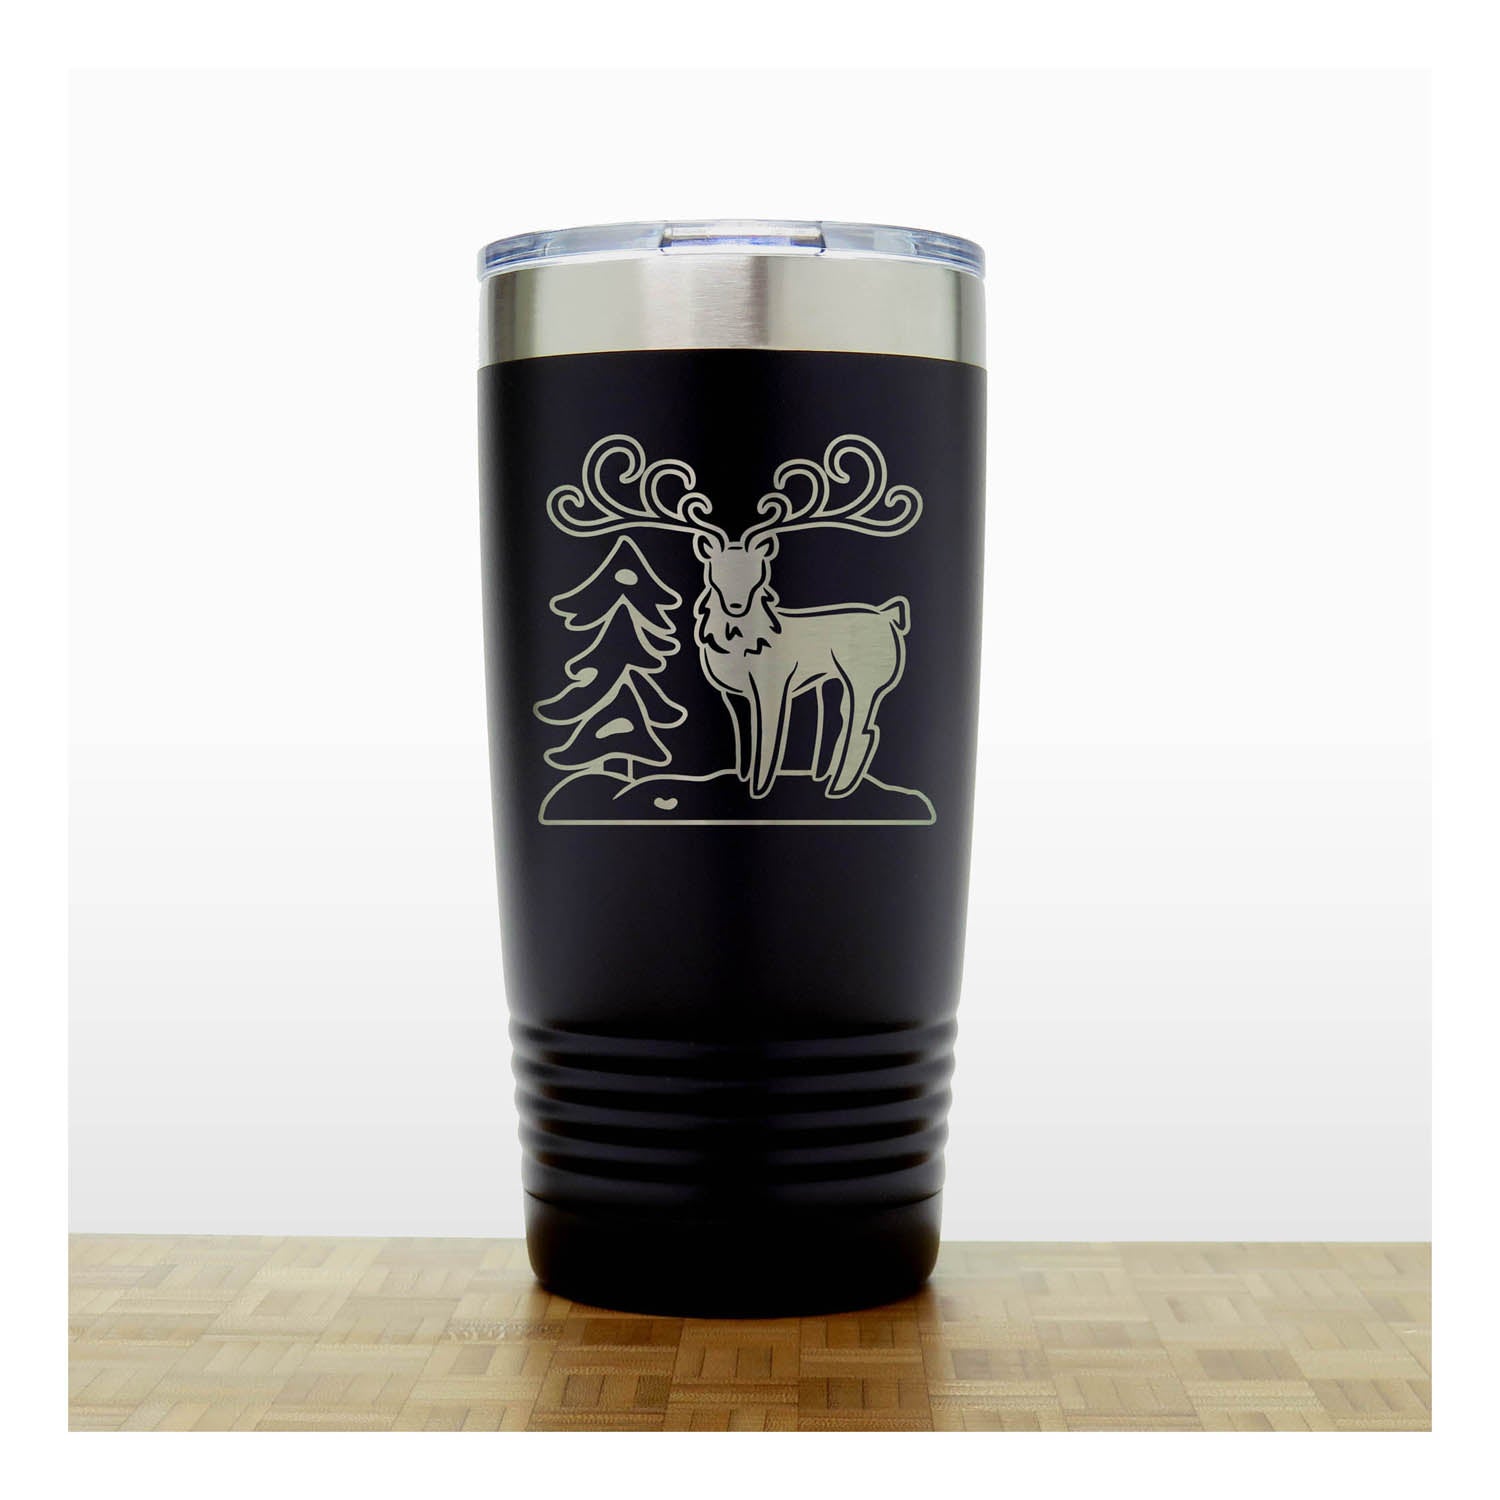 Black - Insulated Travel Mug with the design of a Reindeer sta nding beside a Christmas tree - Copyright Hues in Glass